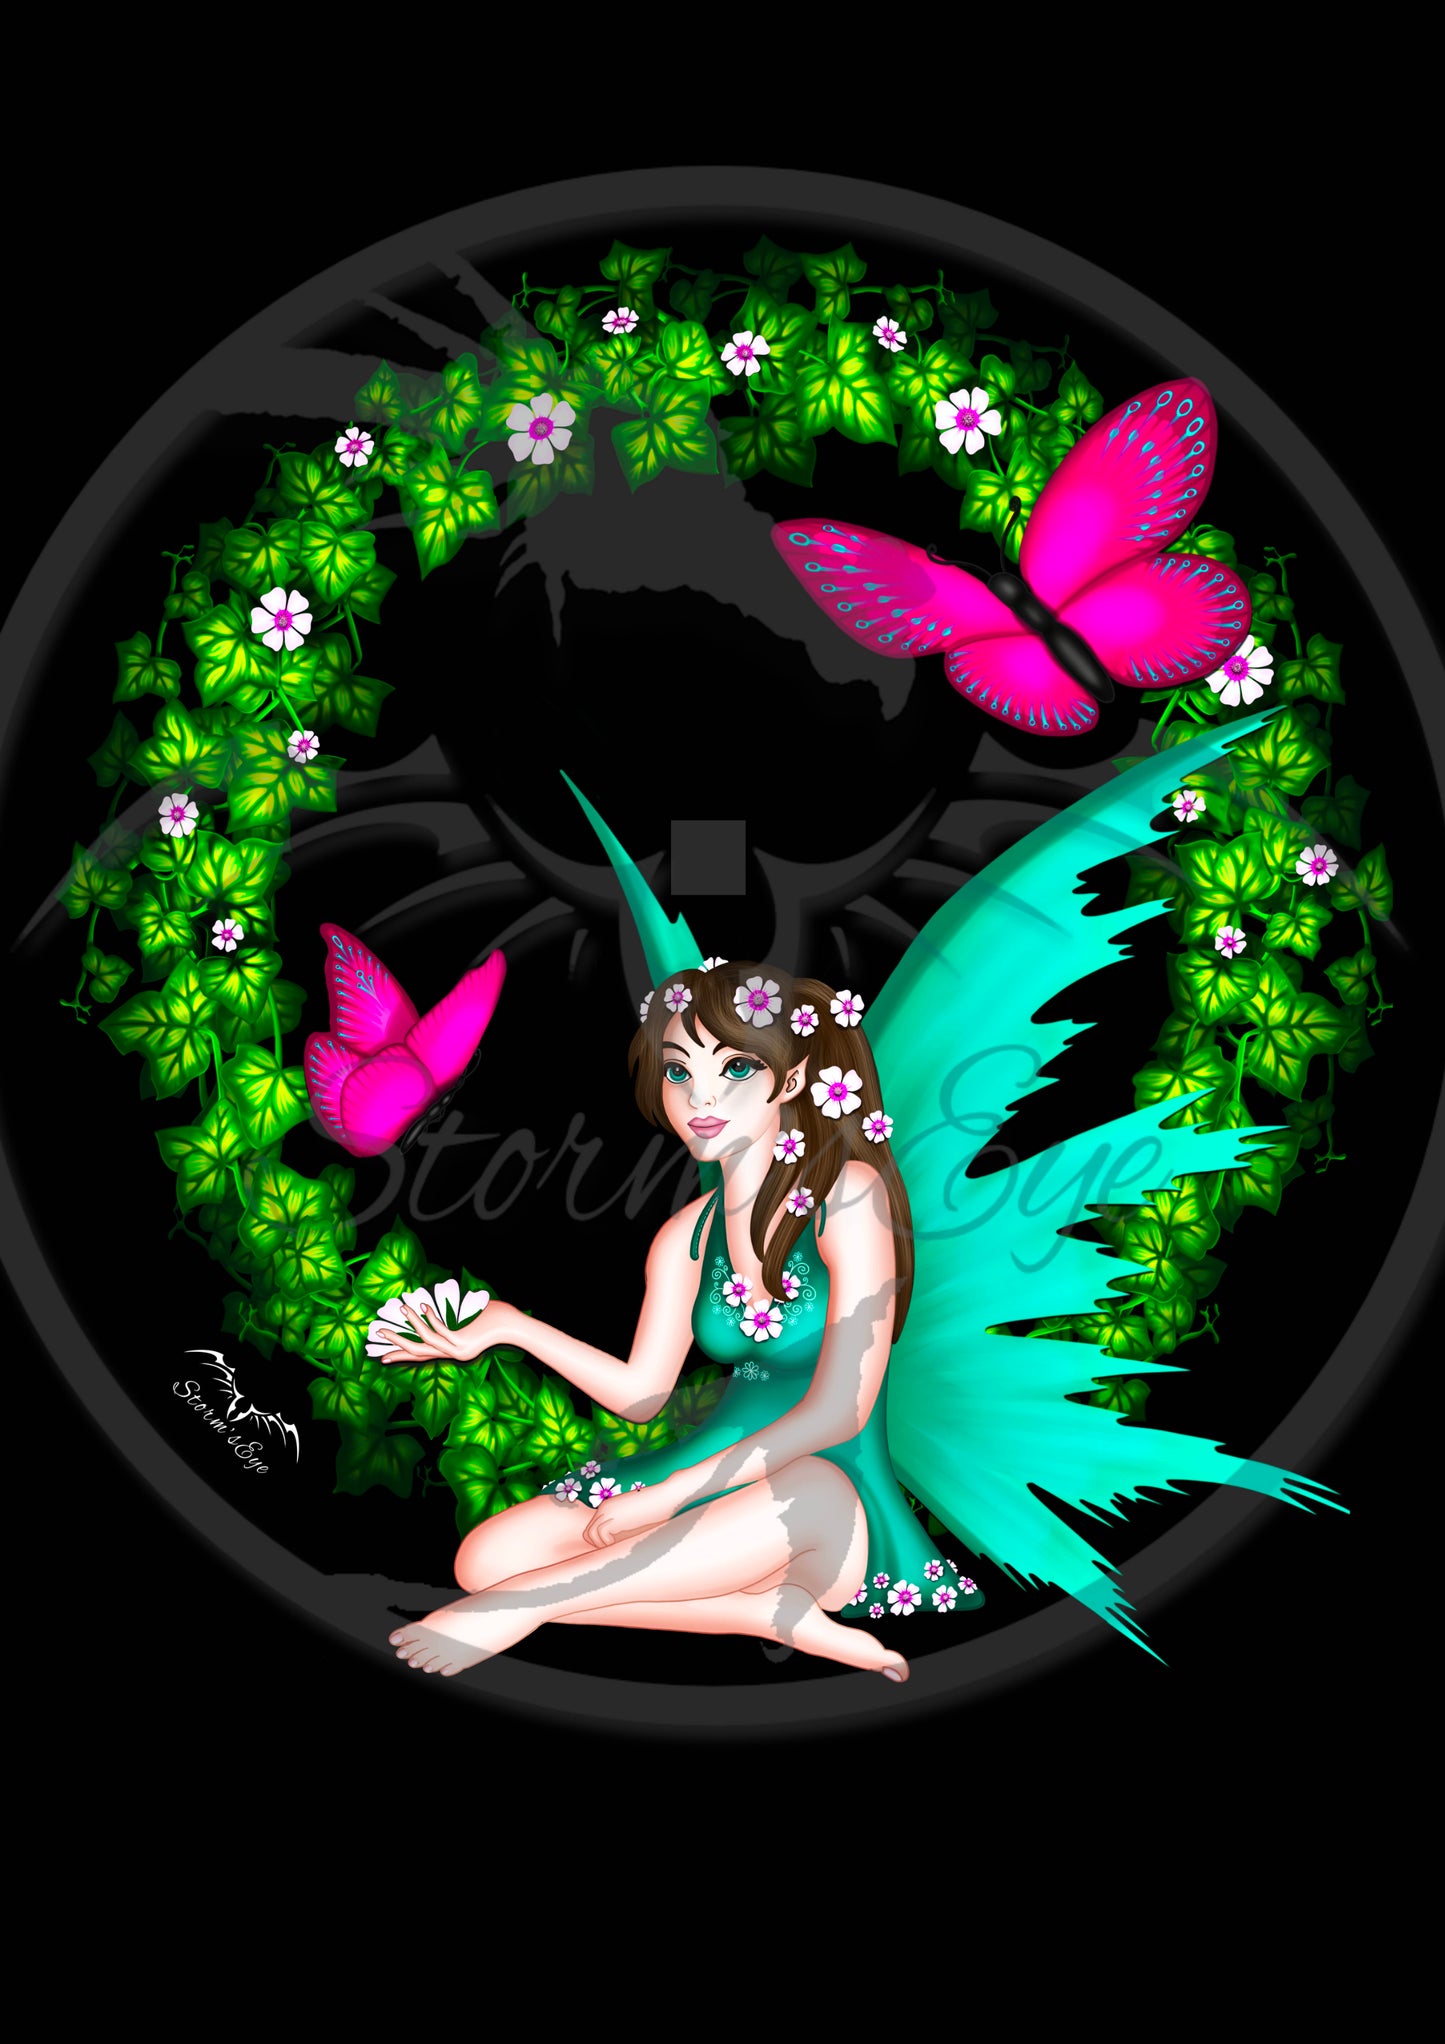 Butterfly Fairy design, by Stormseye Design